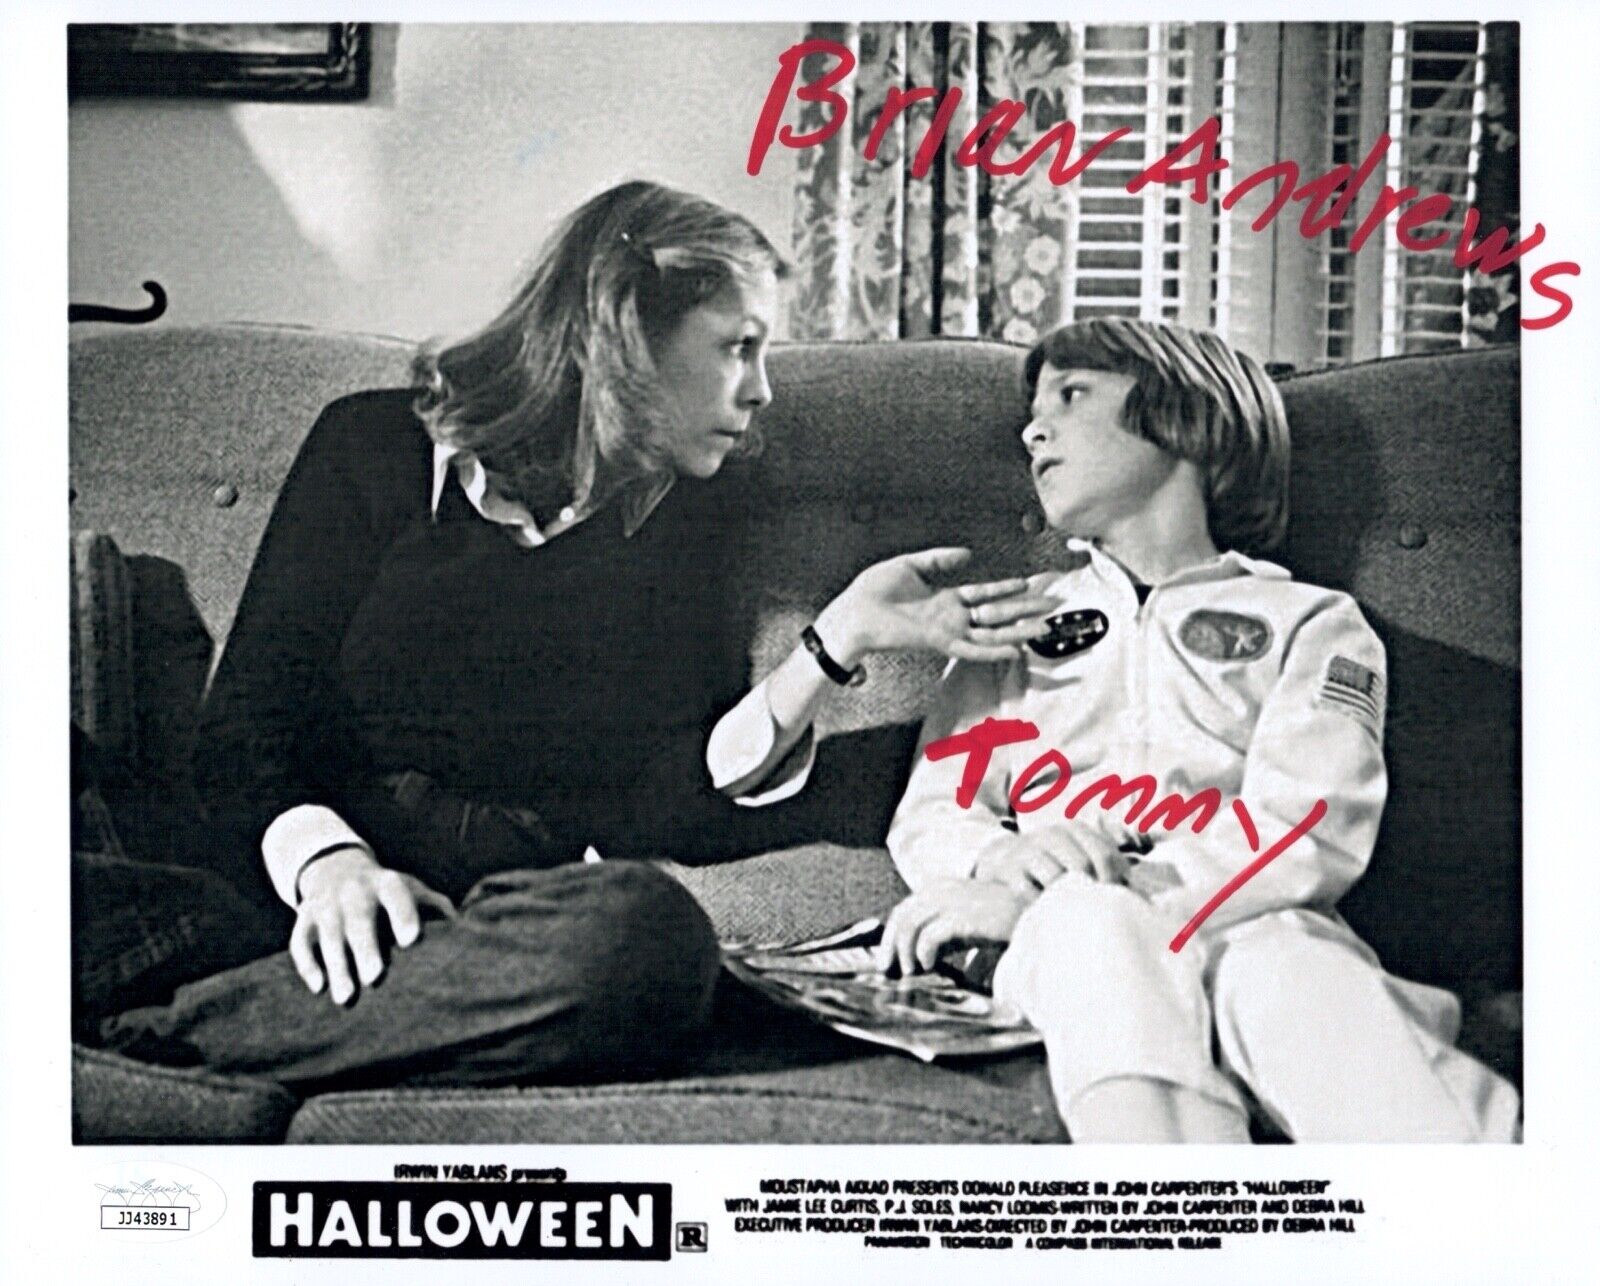 BRIAN ANDREWS Signed HALLOWEEN 8x10 Photo Poster painting IN PERSON Autograph JSA COA Cert